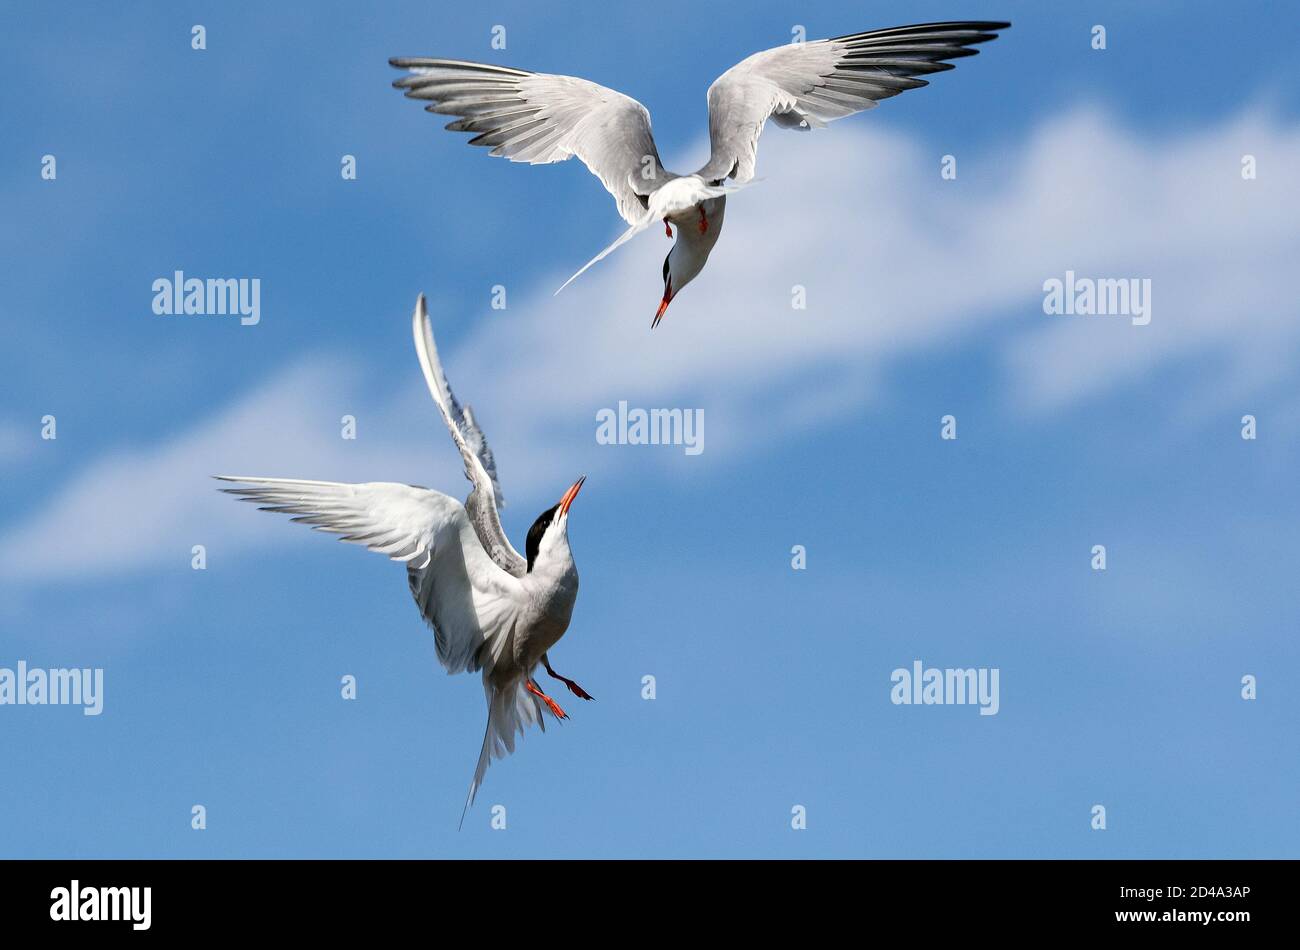 Common Terns (Sterna hirundo) interacting in flight.  Adult common terns in flight on the blue sky background Stock Photo